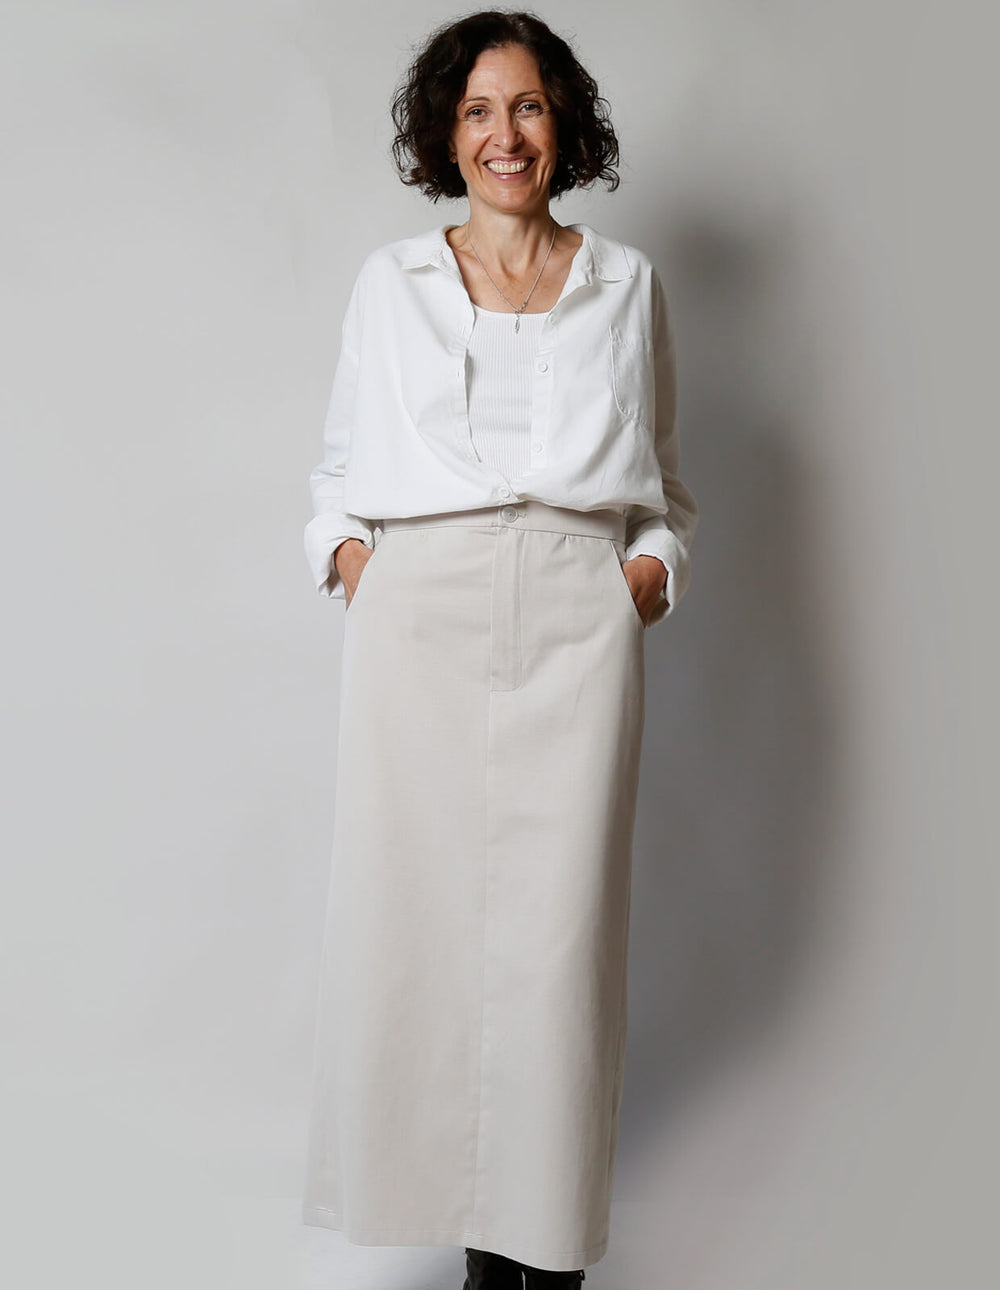 Woman wearing the Maxi Skirt sewing pattern from The Maker’s Atelier on The Fold Line. A skirt pattern made in cottons, linens, denim, or wool suiting fabrics, featuring a maxi length, fly front fastening, front slash pockets, back patch pockets, and high